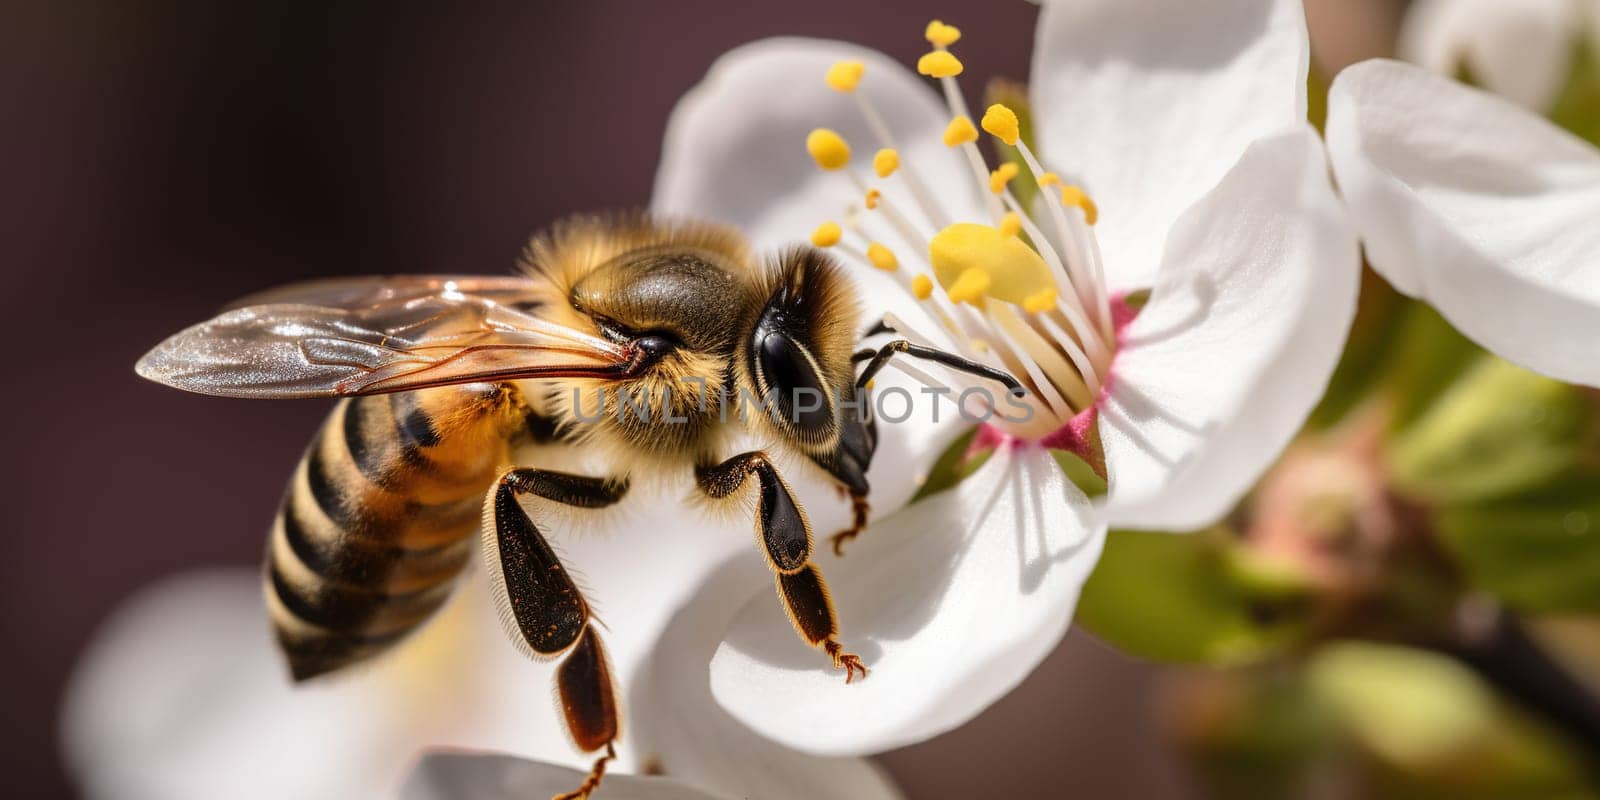 Close-up macro of a bee collecting pollen on a white flower with blurred background